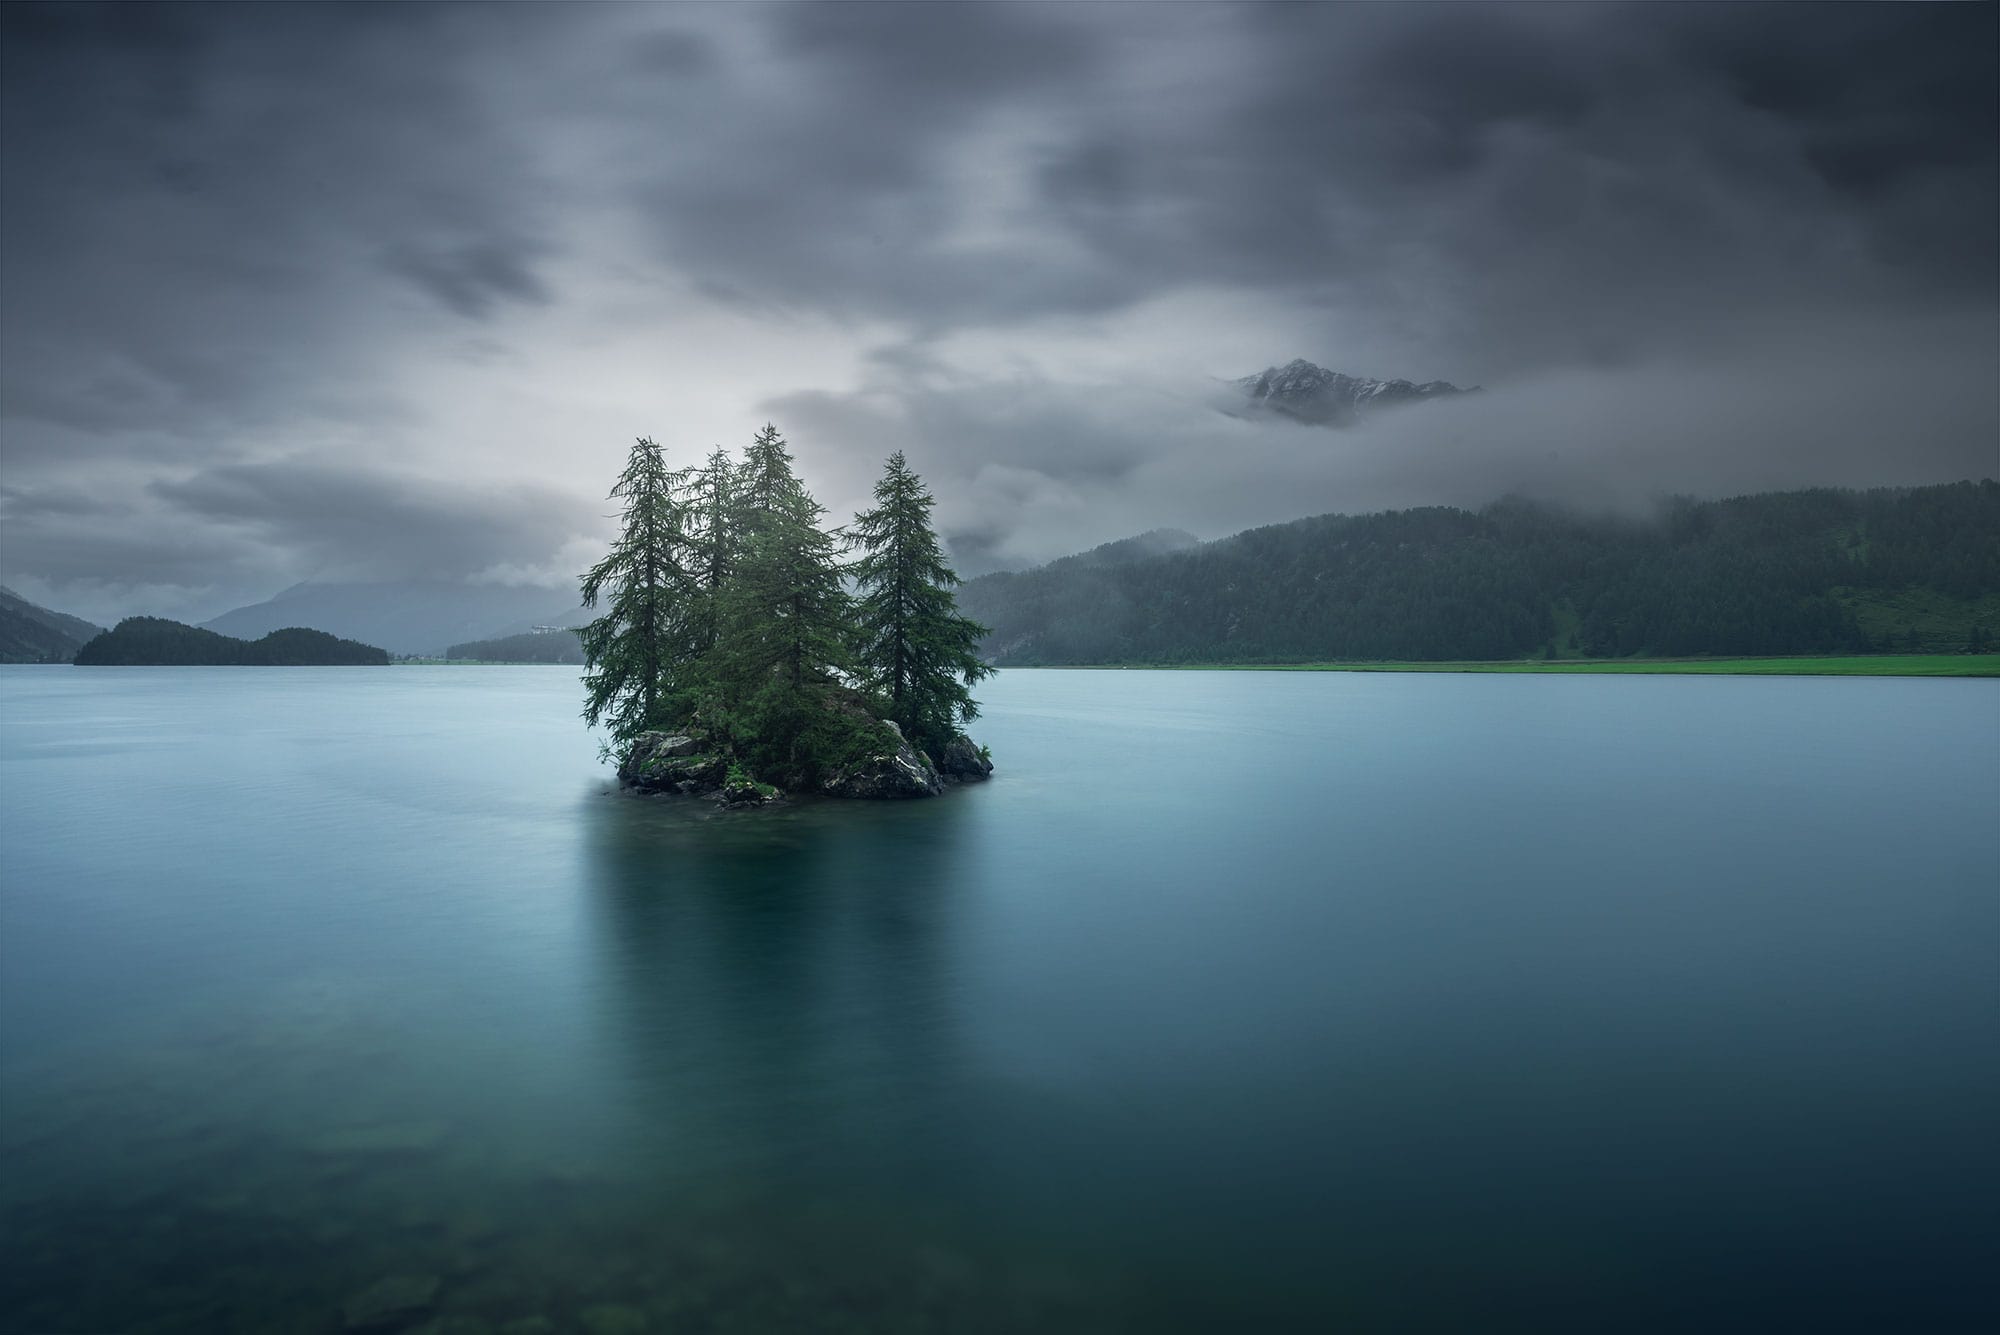 Embark on a visual journey through the lens of Swiss photographer Jennifer Esseiva, as she skillfully captures the intense beauty of a long exposure dramatic storm sky over the Lake of Sils in St. Moritz, Switzerland. Jennifer's landscape photography transforms the moody, foggy atmosphere into a mesmerizing visual symphony. Each frame is a testament to the artistry of capturing nature's raw emotions, as the stormy sky unfolds over the picturesque Swiss landscape. Experience the dynamic allure of St. Moritz through Jennifer's lens.